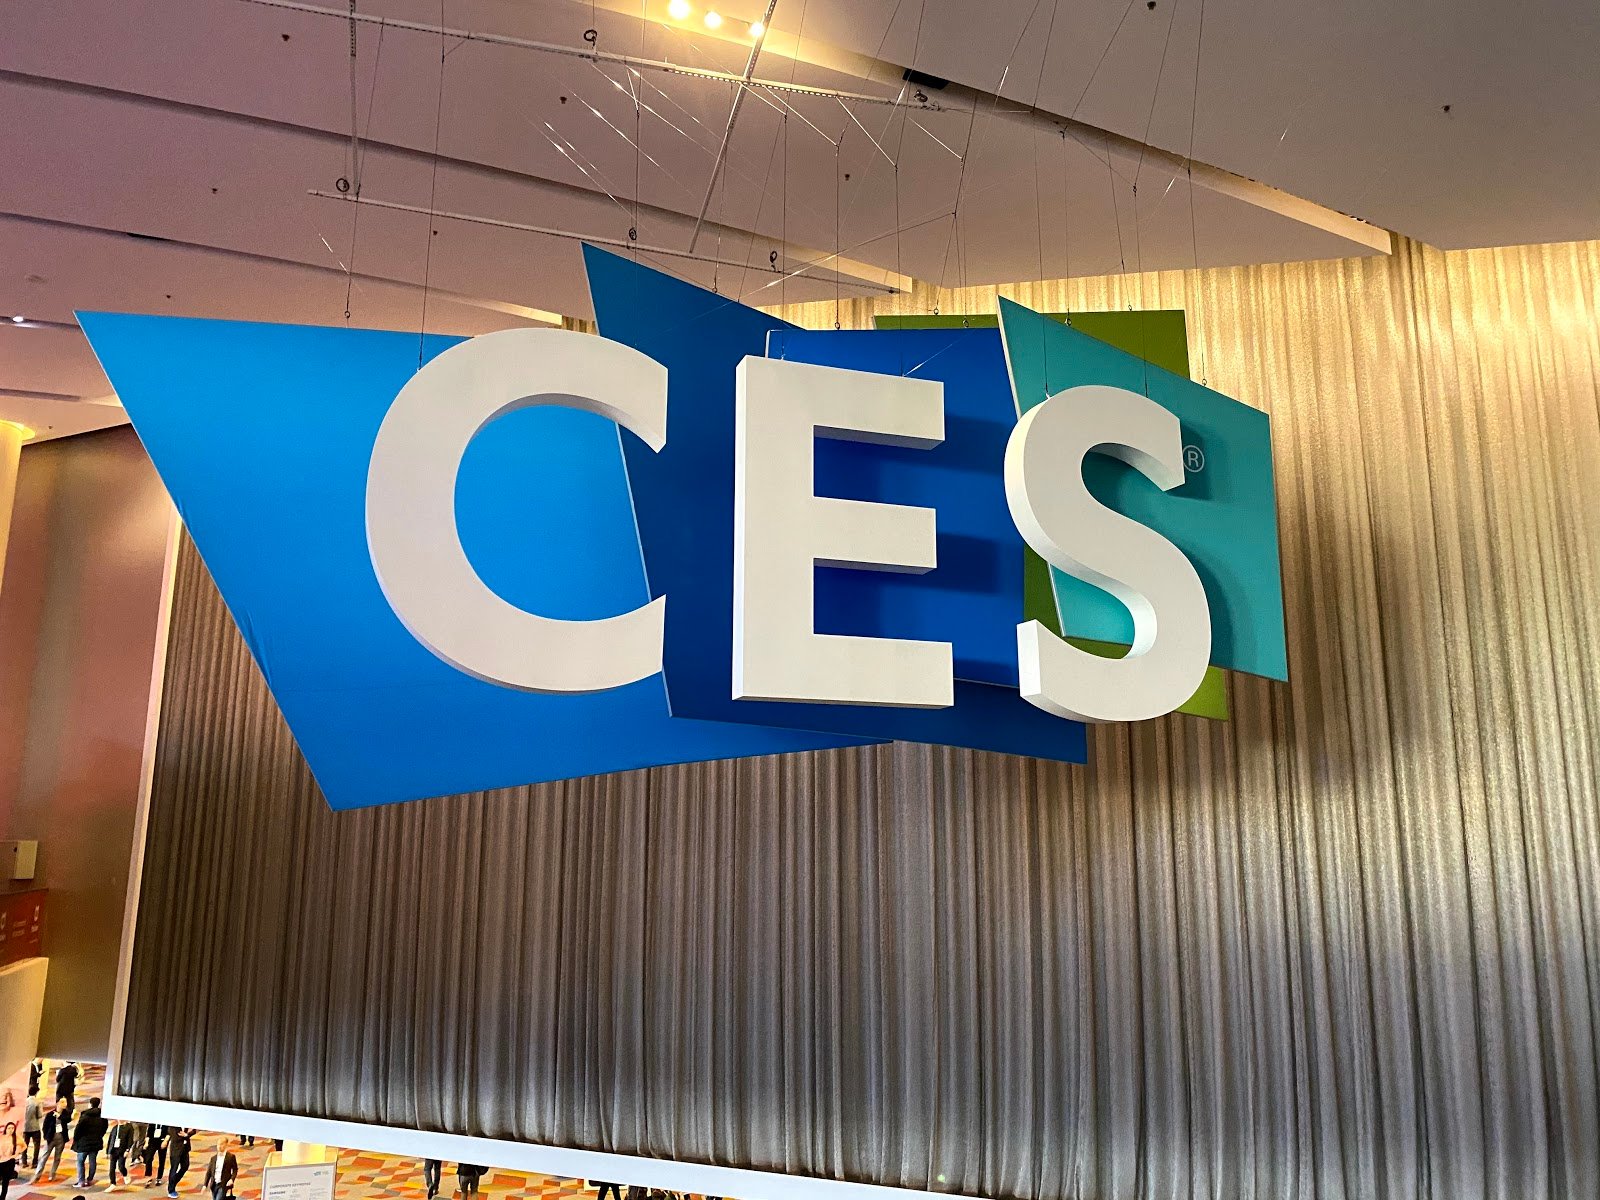 CES welcoming sign